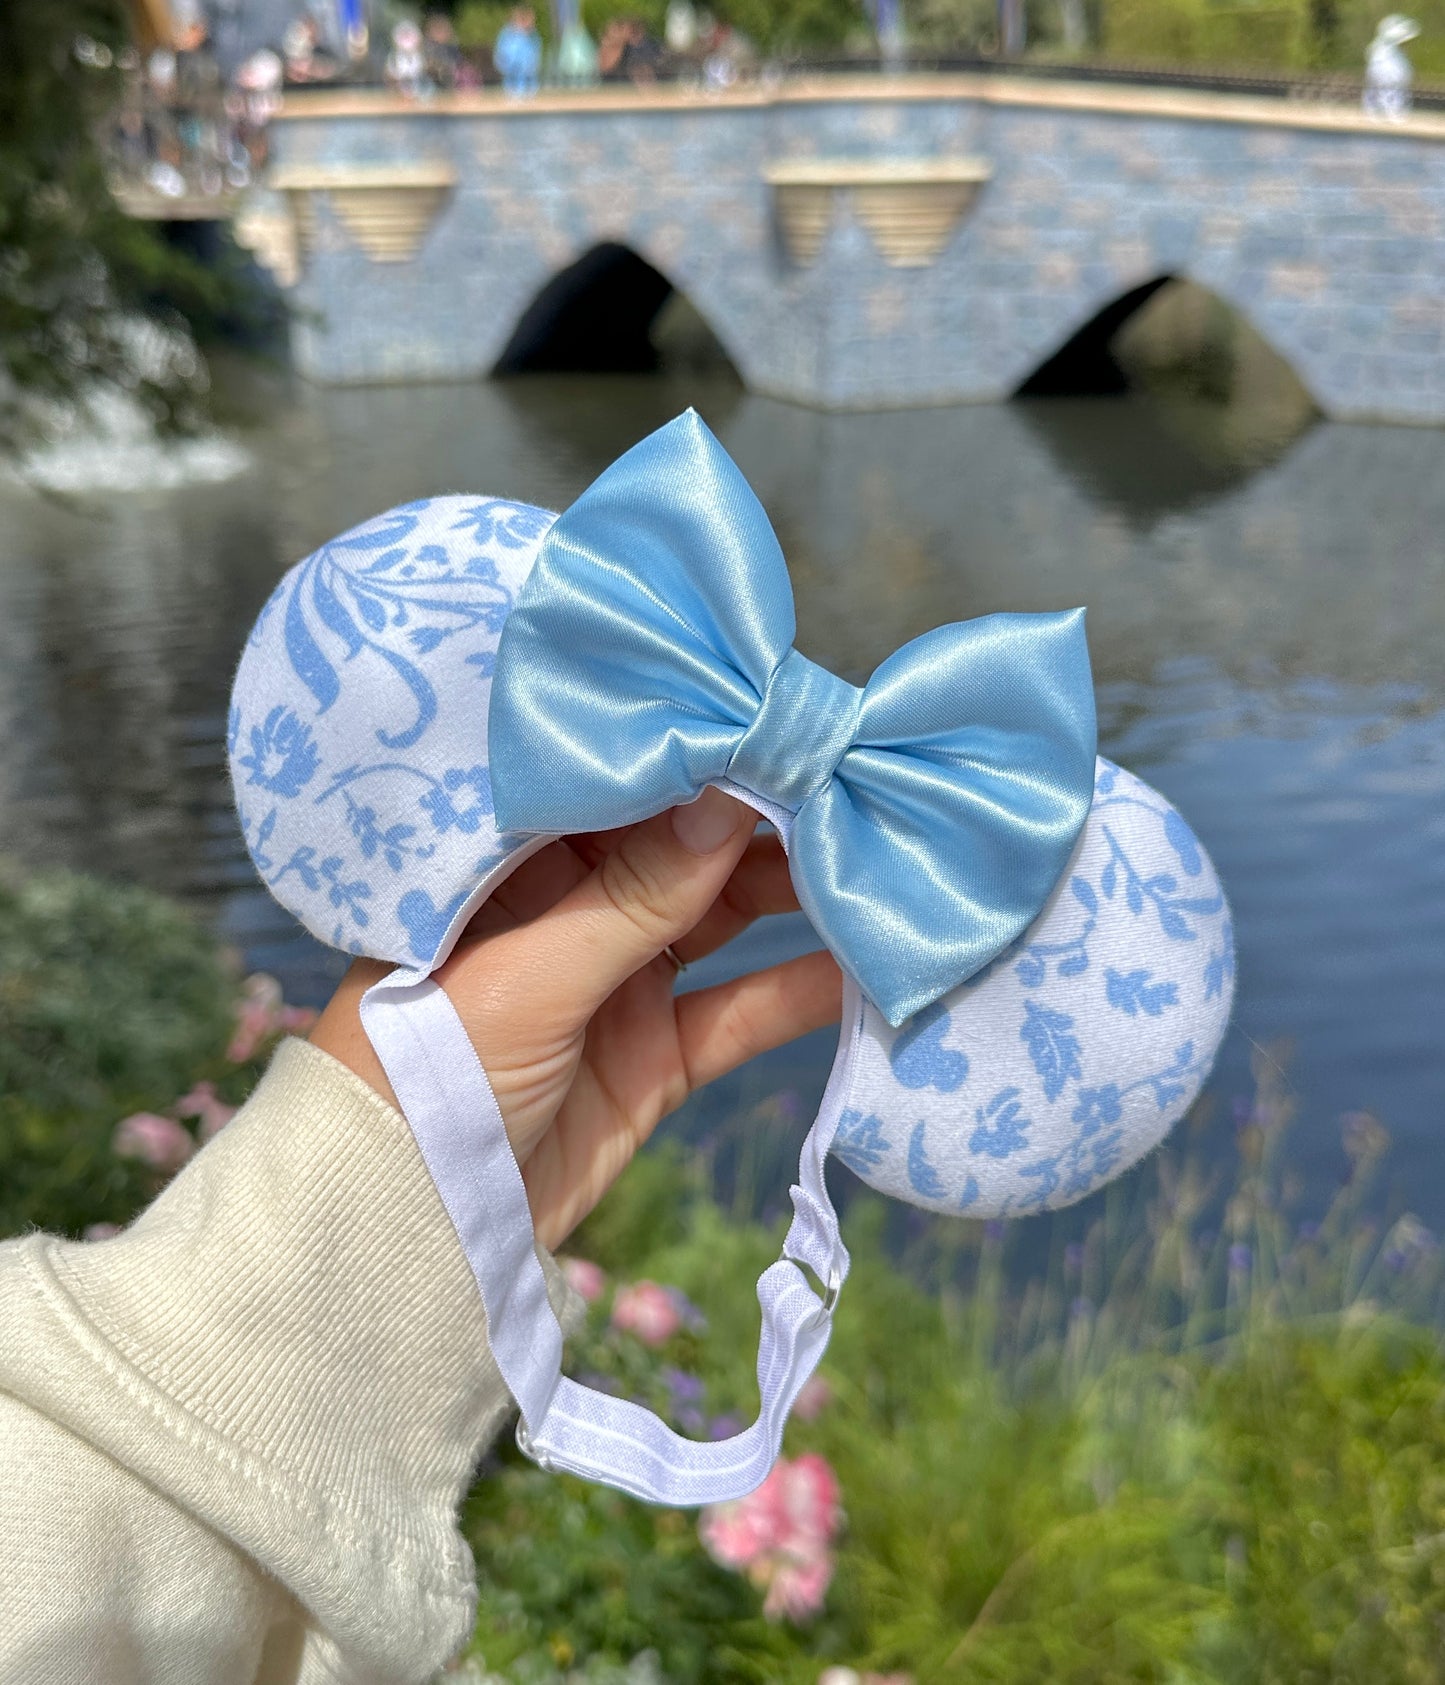 Baby/Child Floral Fantasy Mouse Ears!